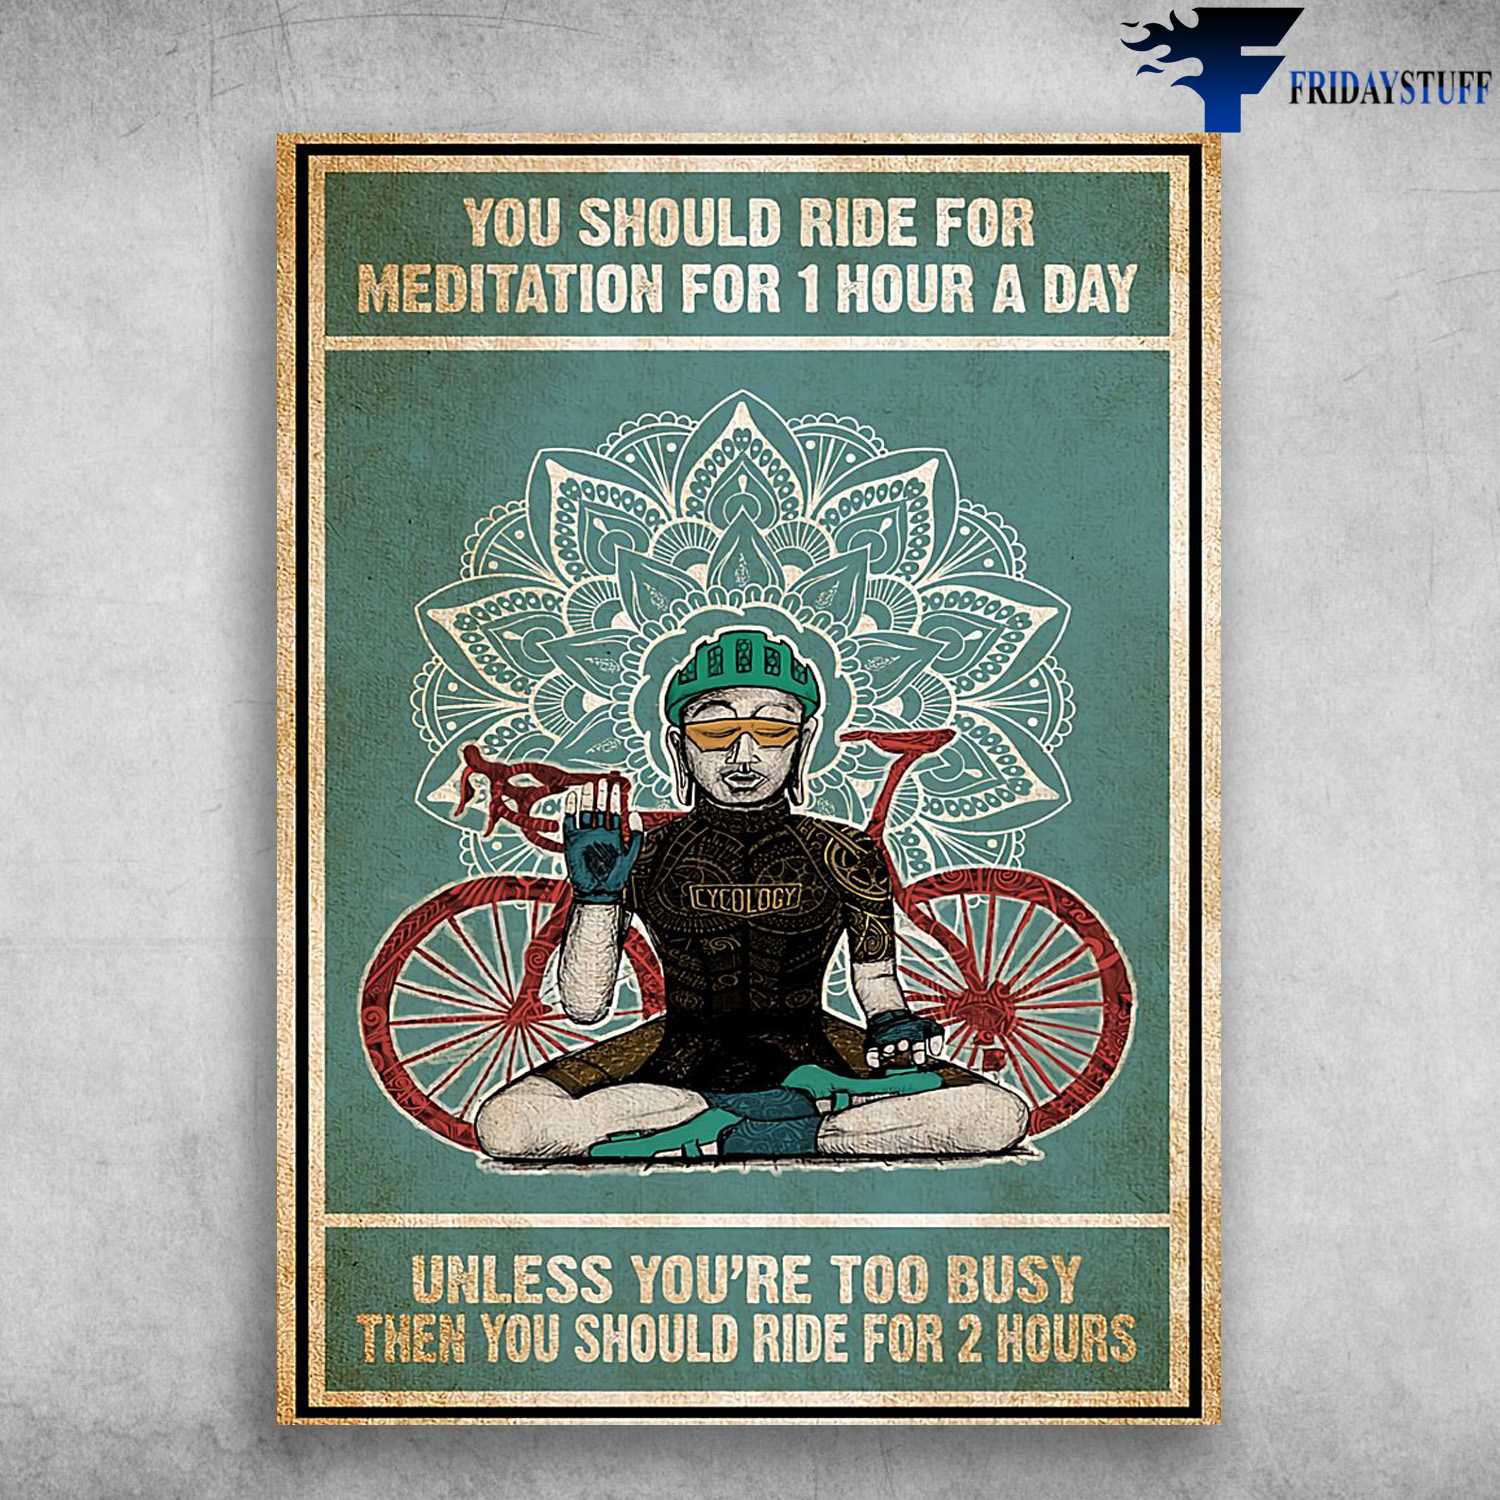 Ride Mediation Cycling - You Should Ride For Meditation 1 Hour A Day, Unless You're Too Busy, Then You Should Ride For 2 Hours